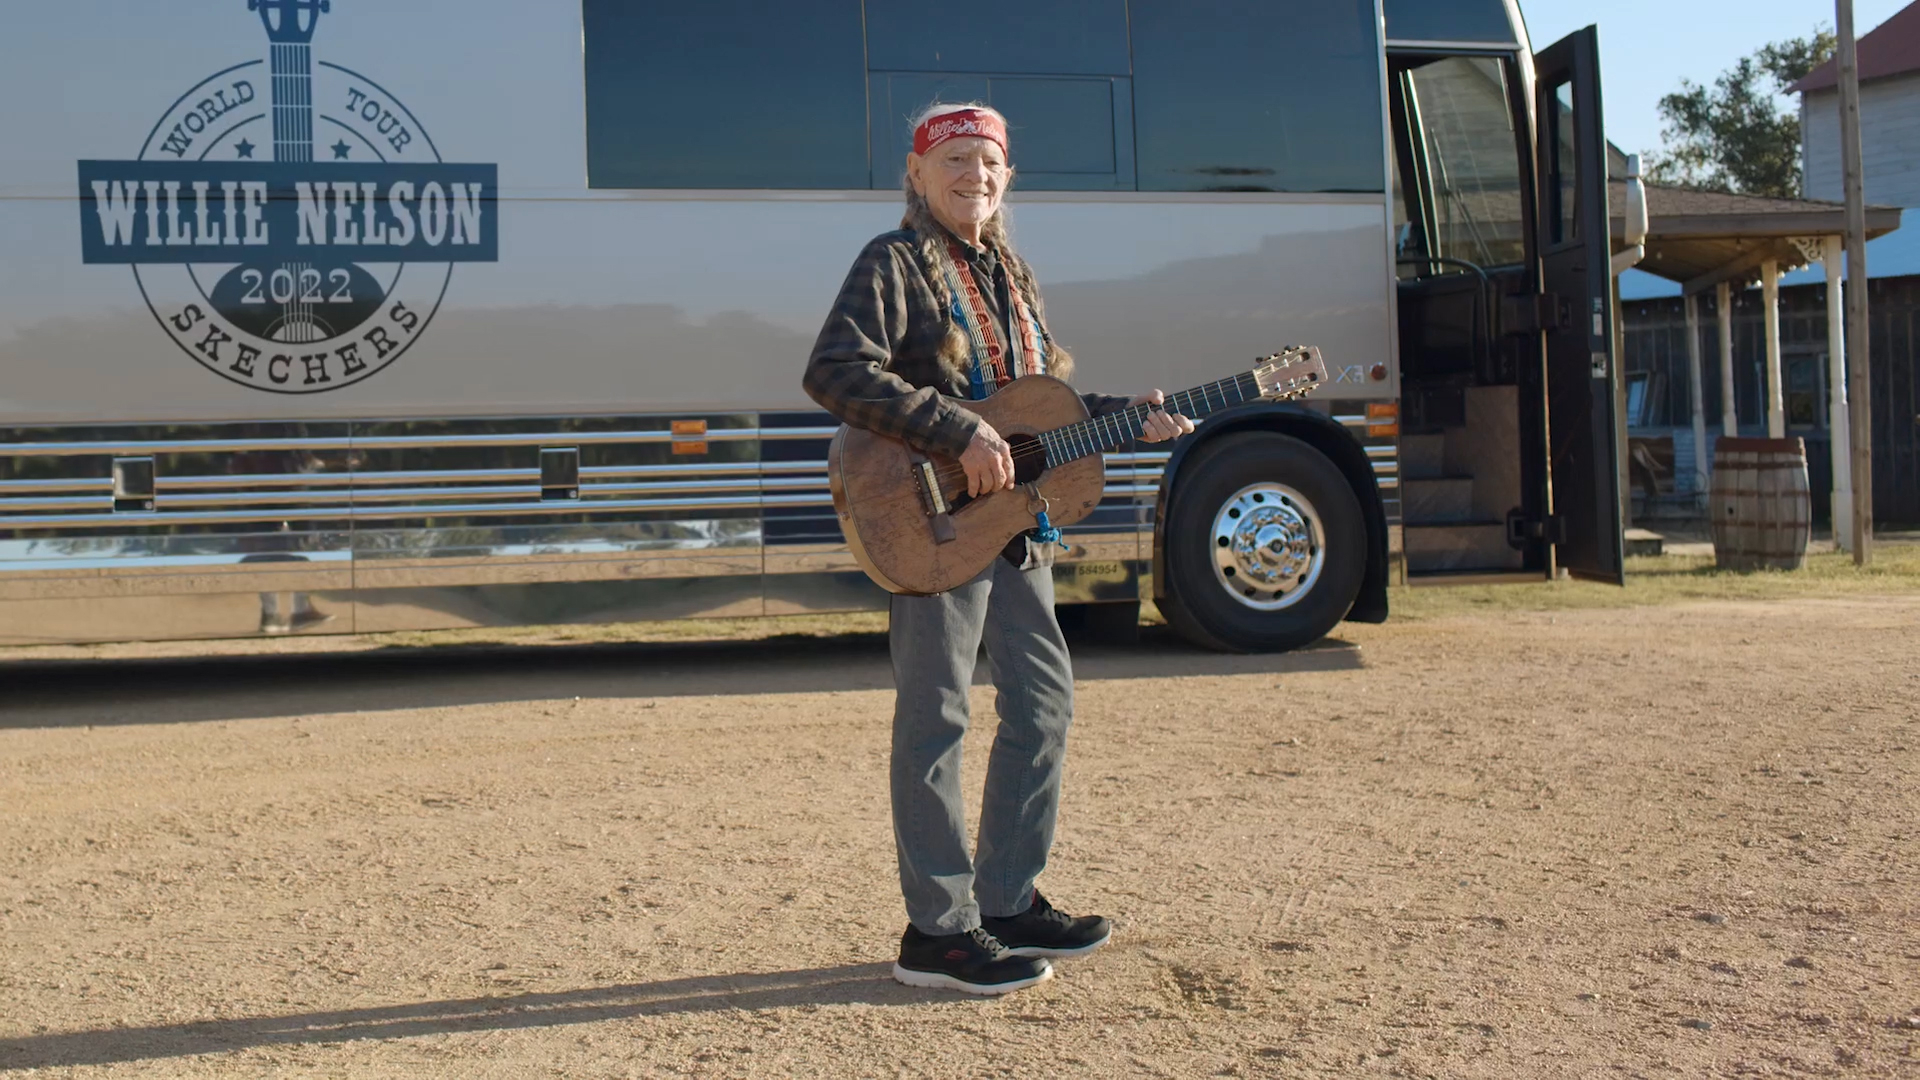 One of the all-time-greats in music, Willie Nelson, brings his iconic song "On the Road Again" to Skechers in Super Bowl commercial.